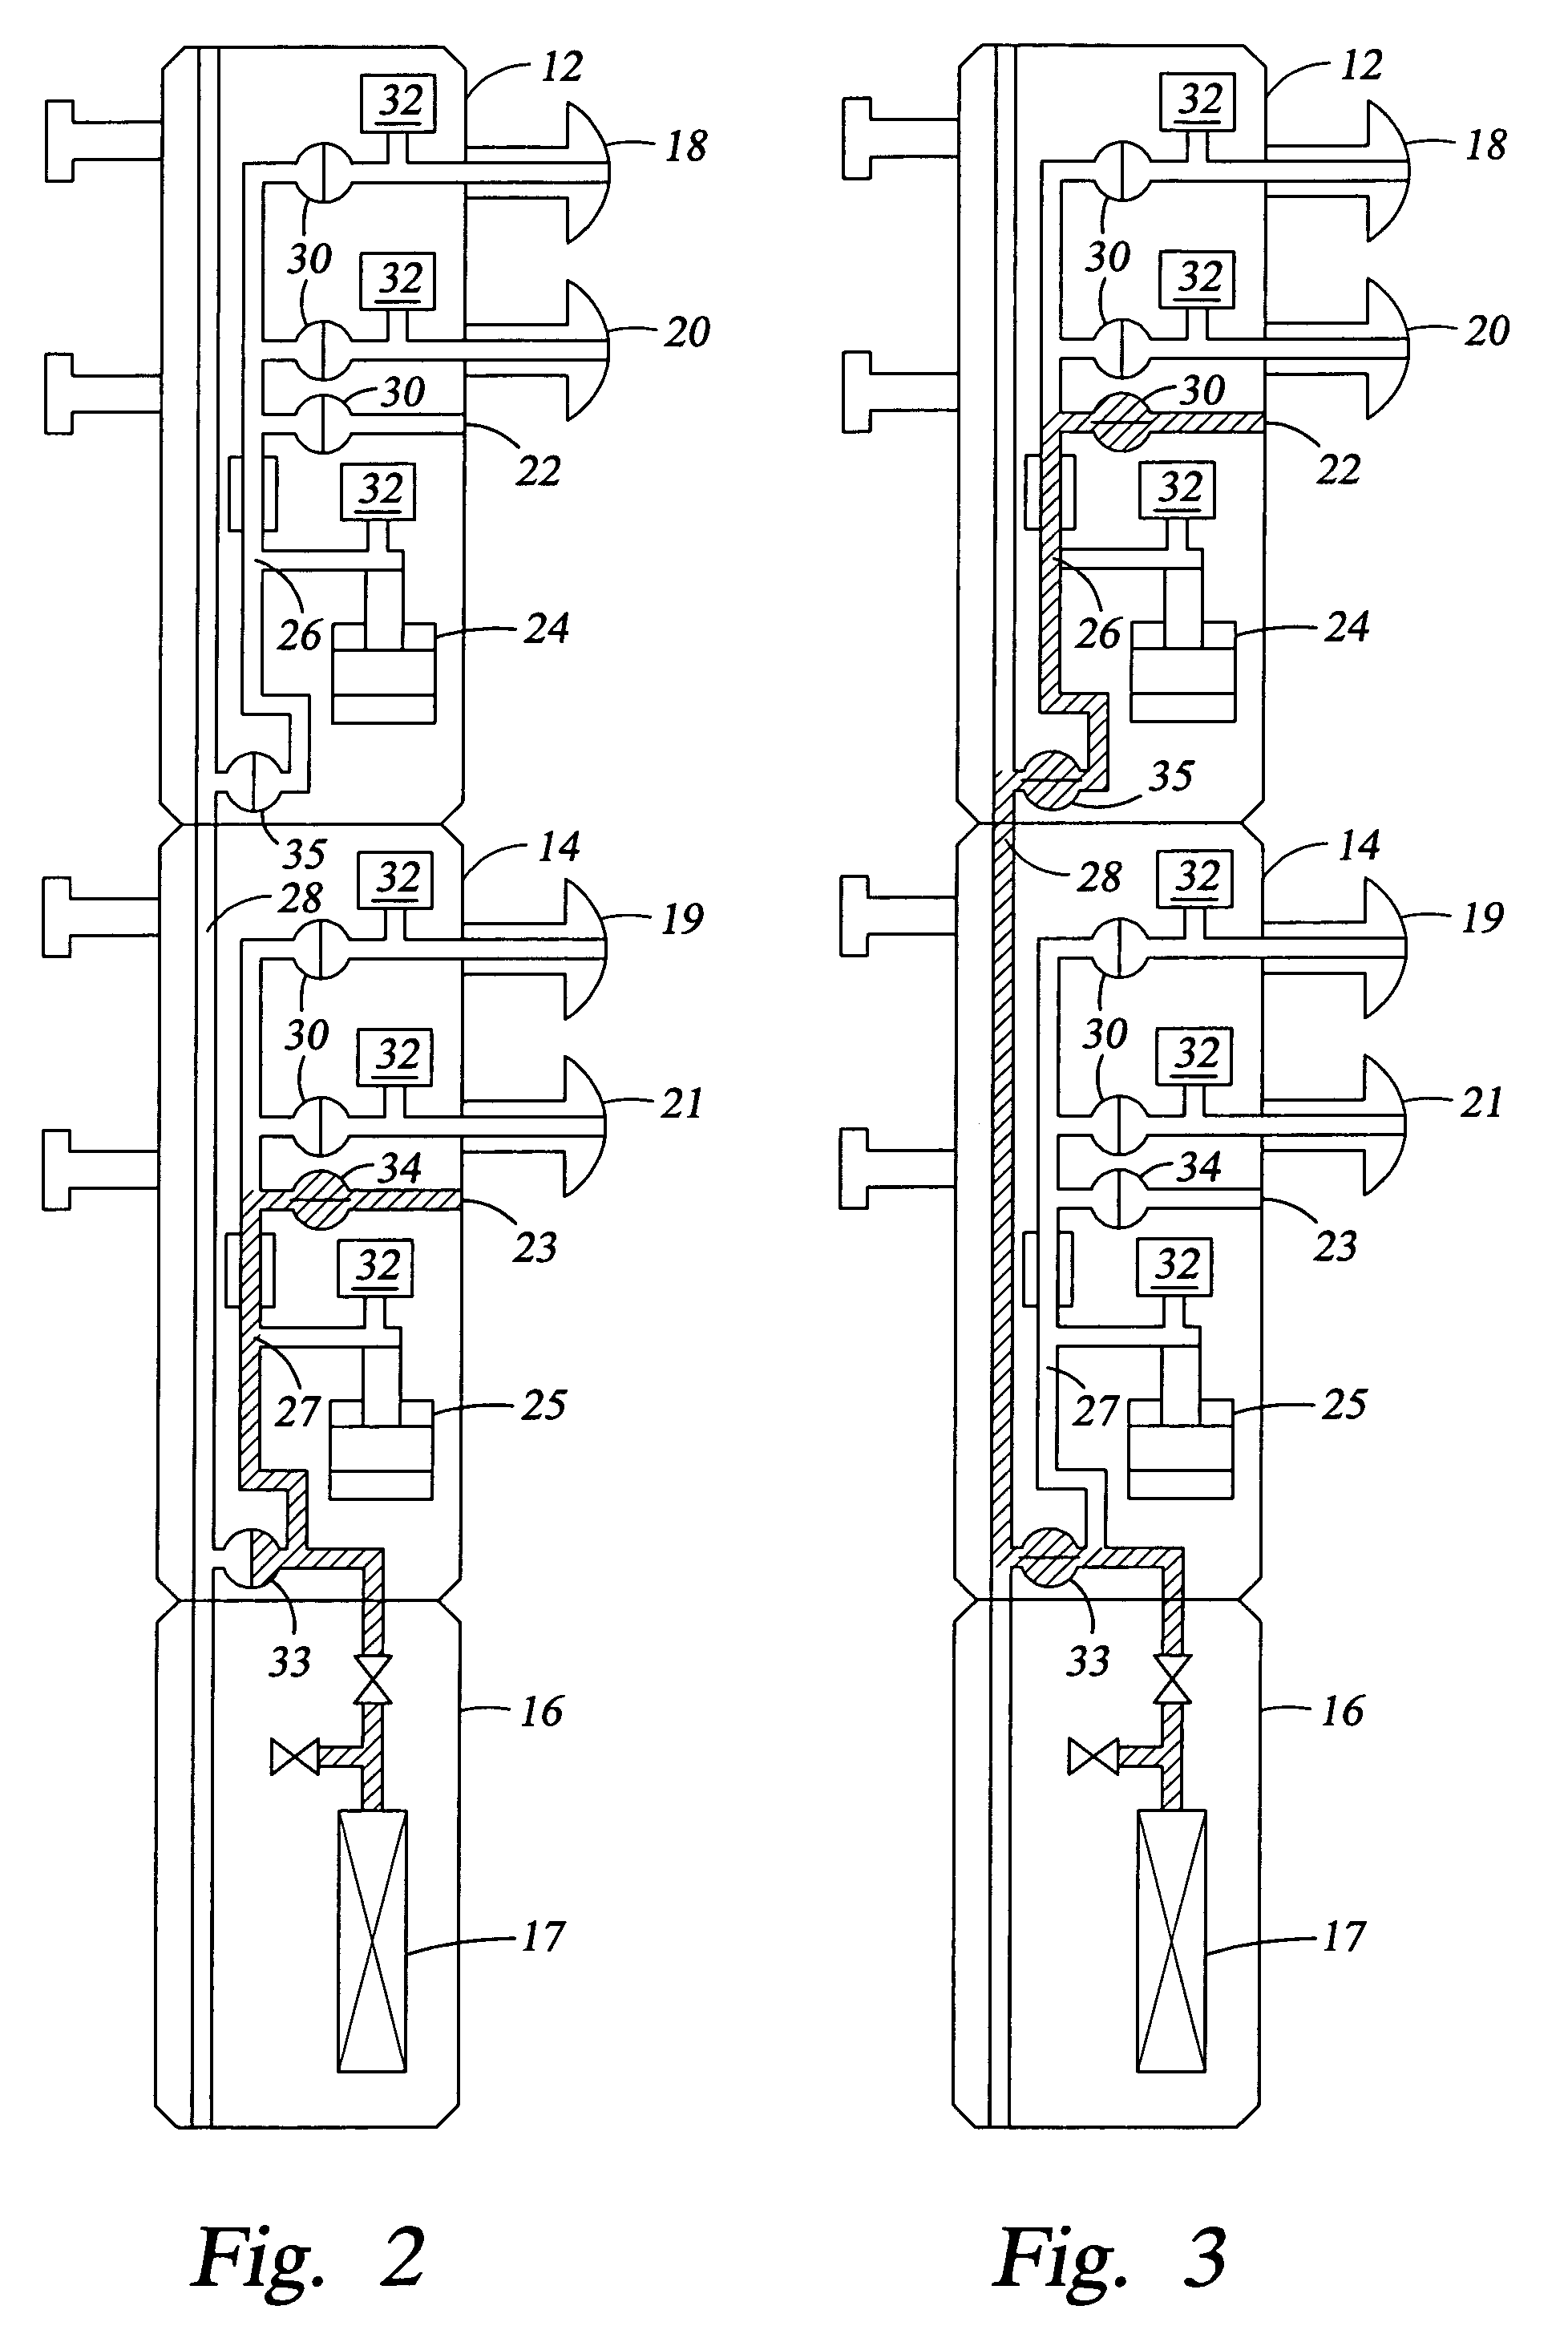 Determining gradients using a multi-probed formation tester